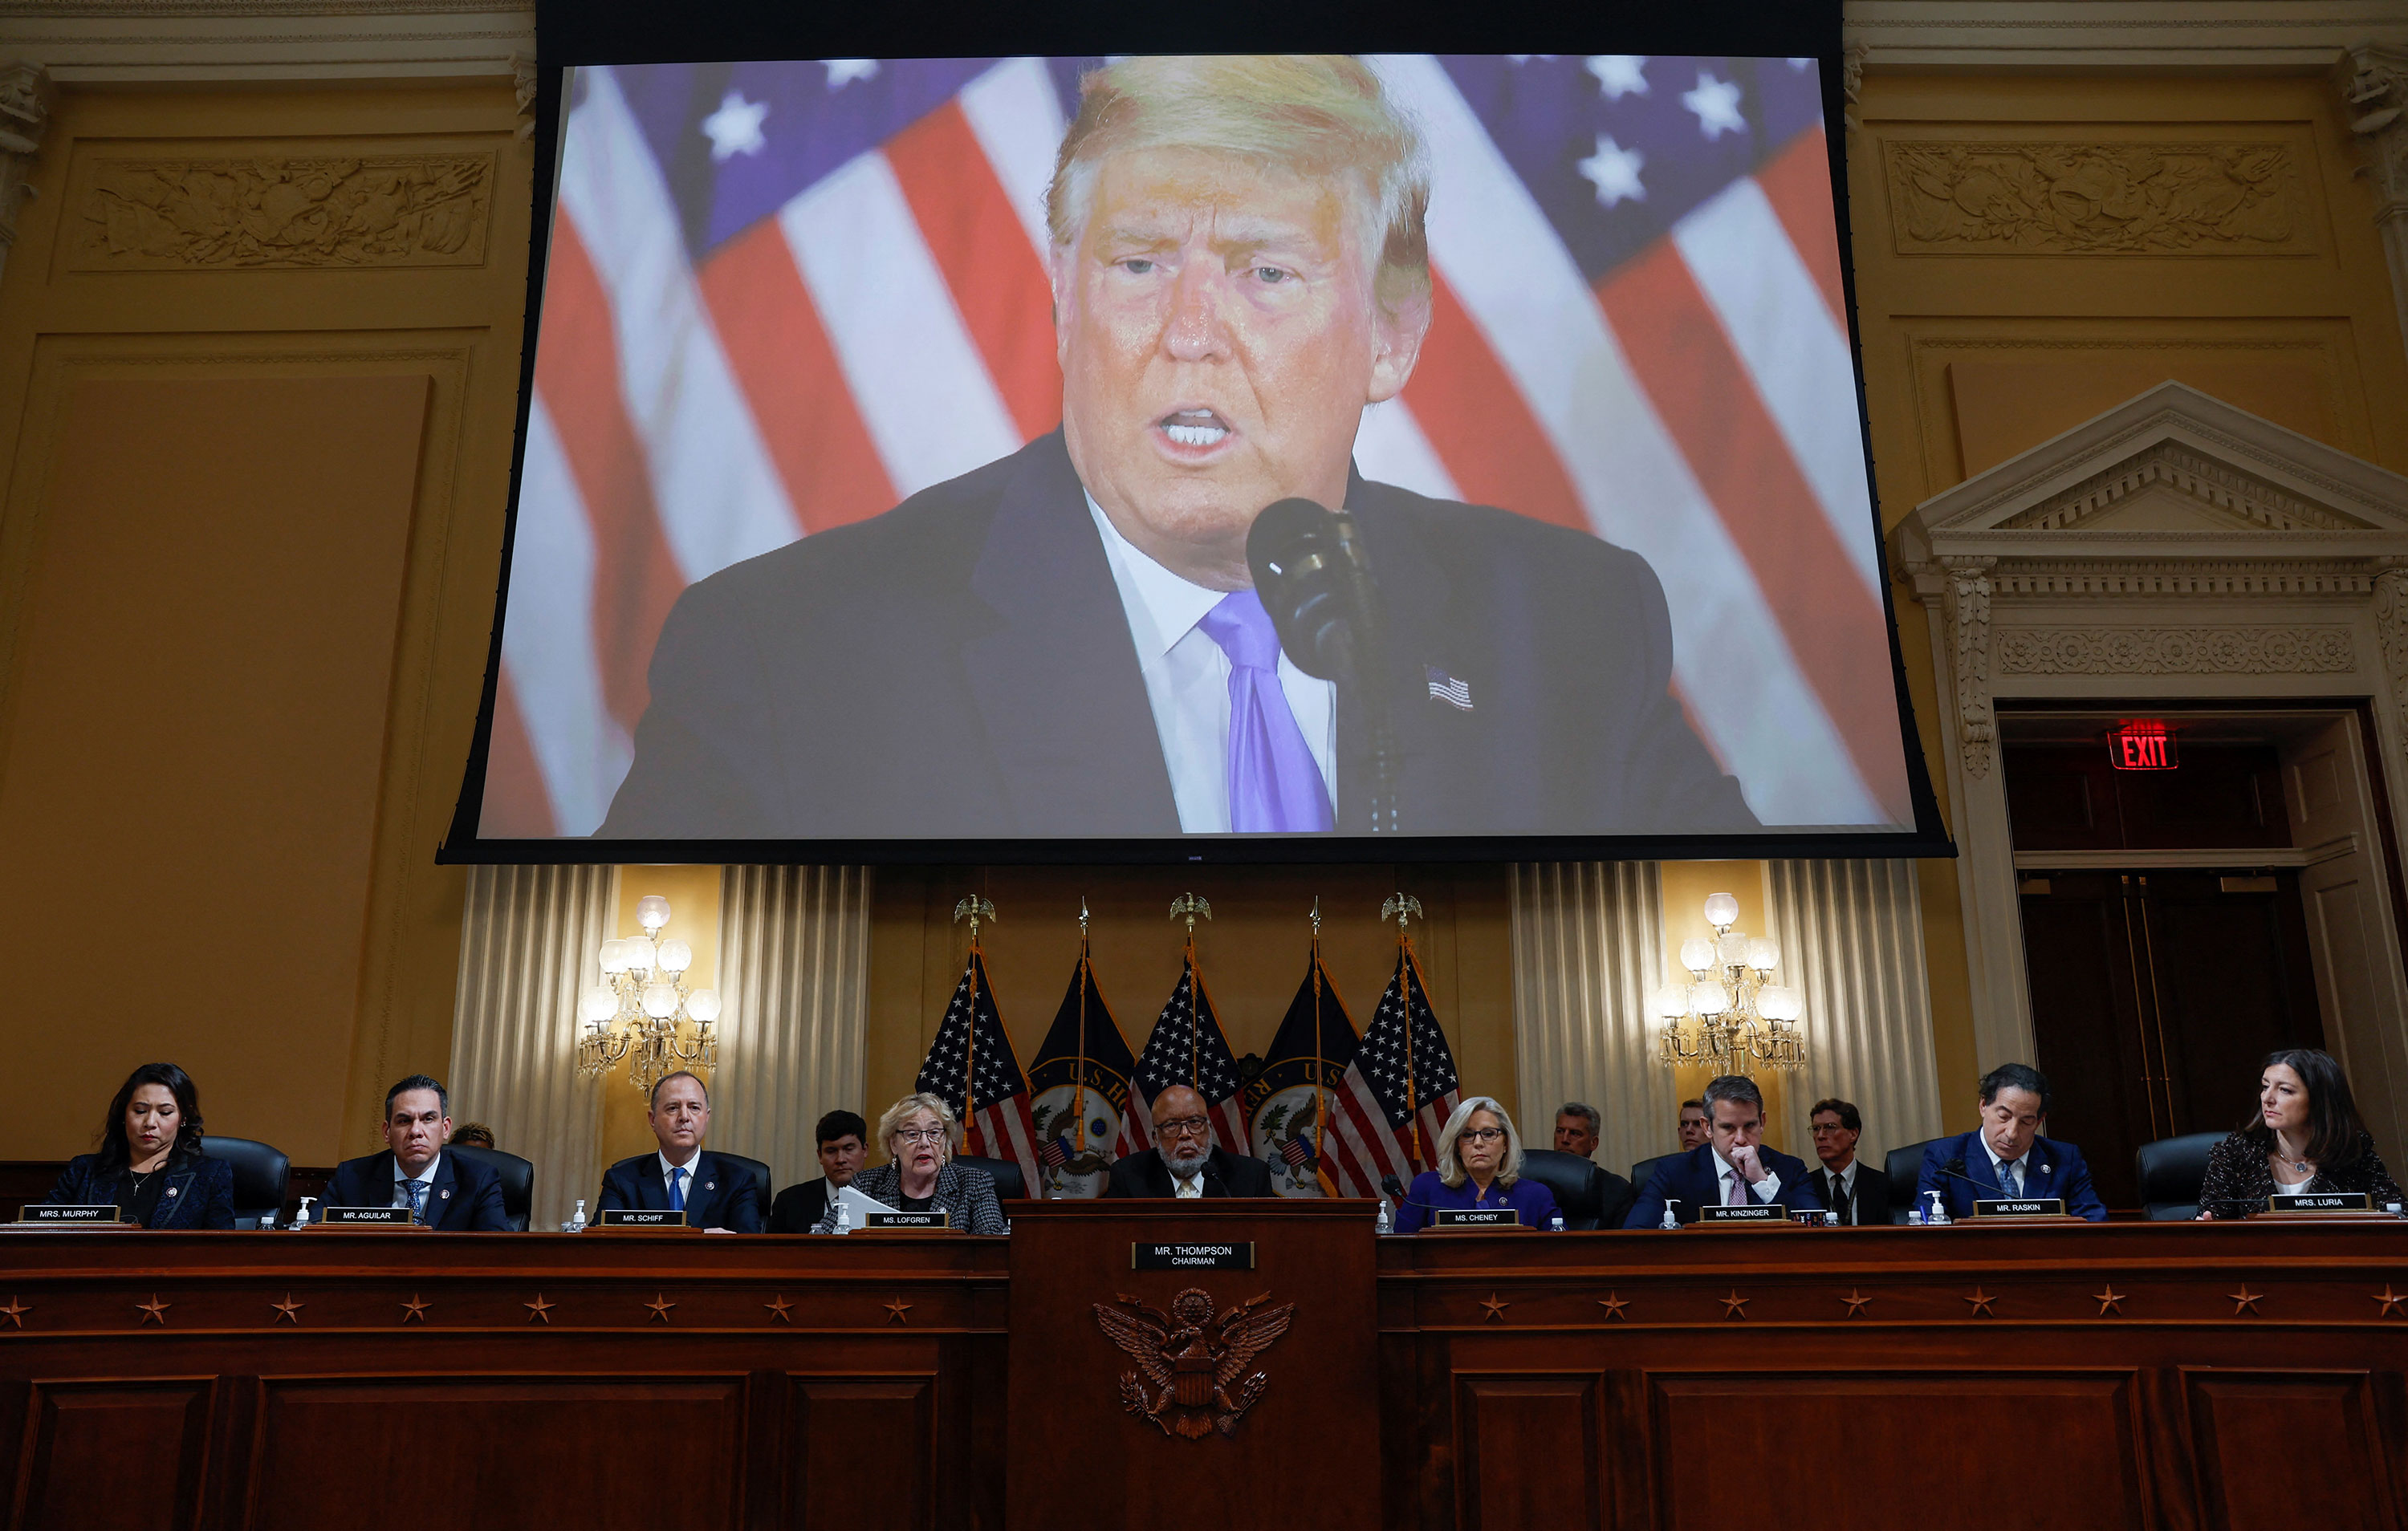 Members of the House Select Committee investigating the January 6 Attack on the U.S. Capitol sit on Monday beneath a video of former President Donald Trump talking about the results of the 2020 election.